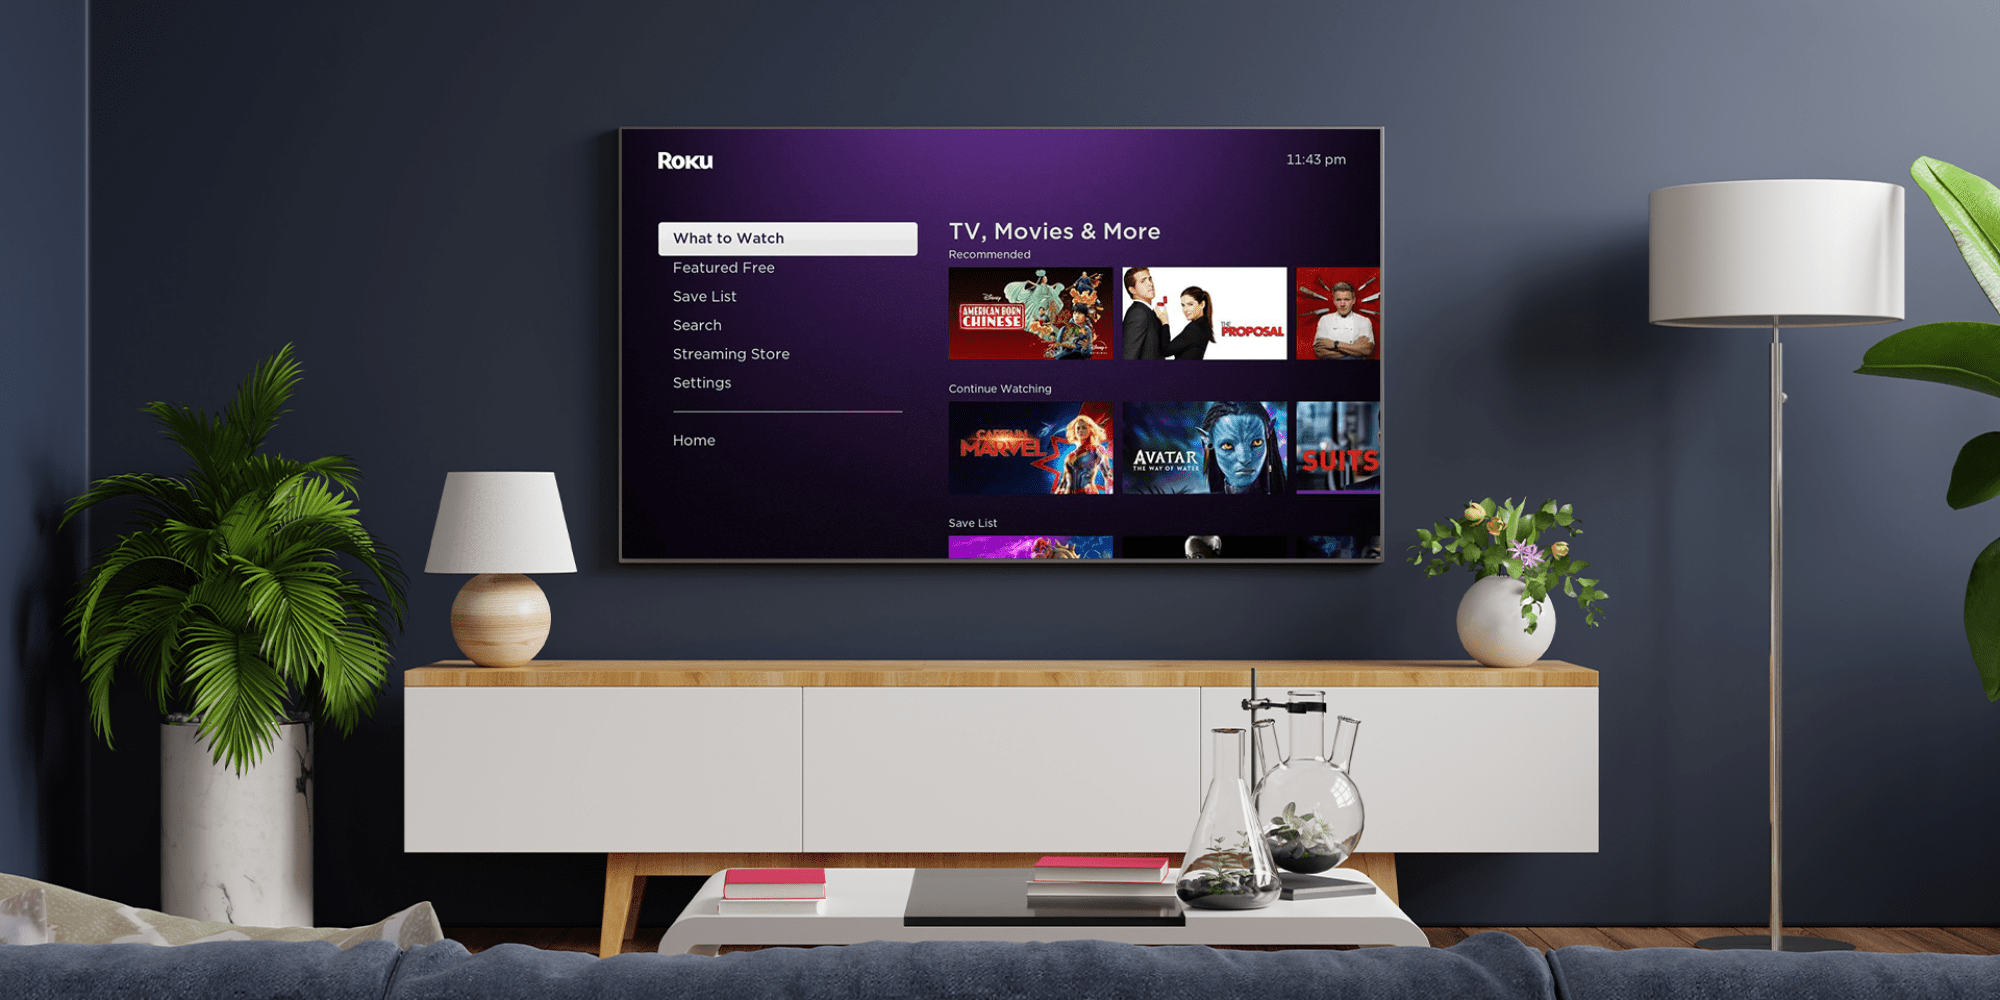 Roku's early Memorial Day deals arrive from 7 Streamers, smart home